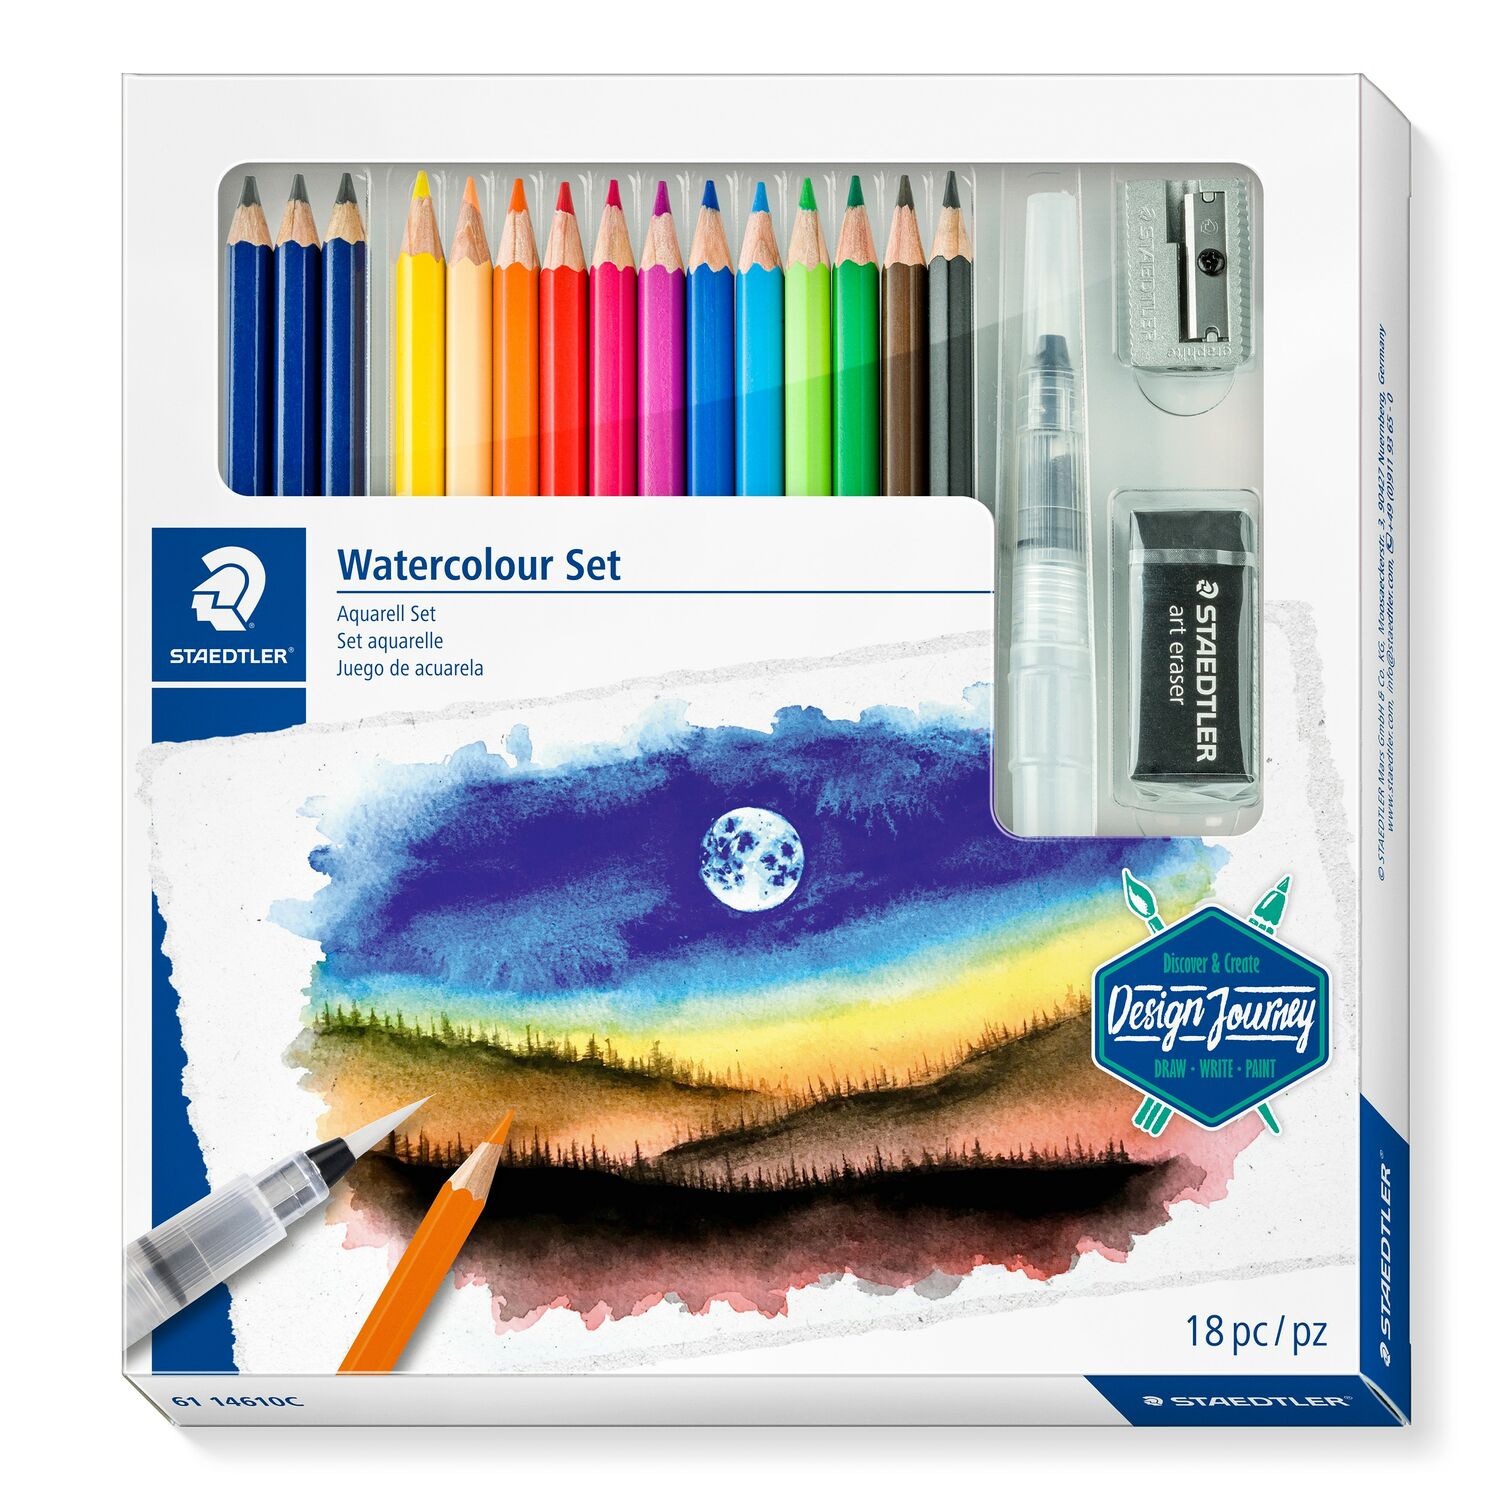 Cardboard box containing 3 watercolour graphite pencils in assorted degrees, 12 watercolour pencils in assorted colours, 1 water brush, 1 eraser and 1 metal sharpener